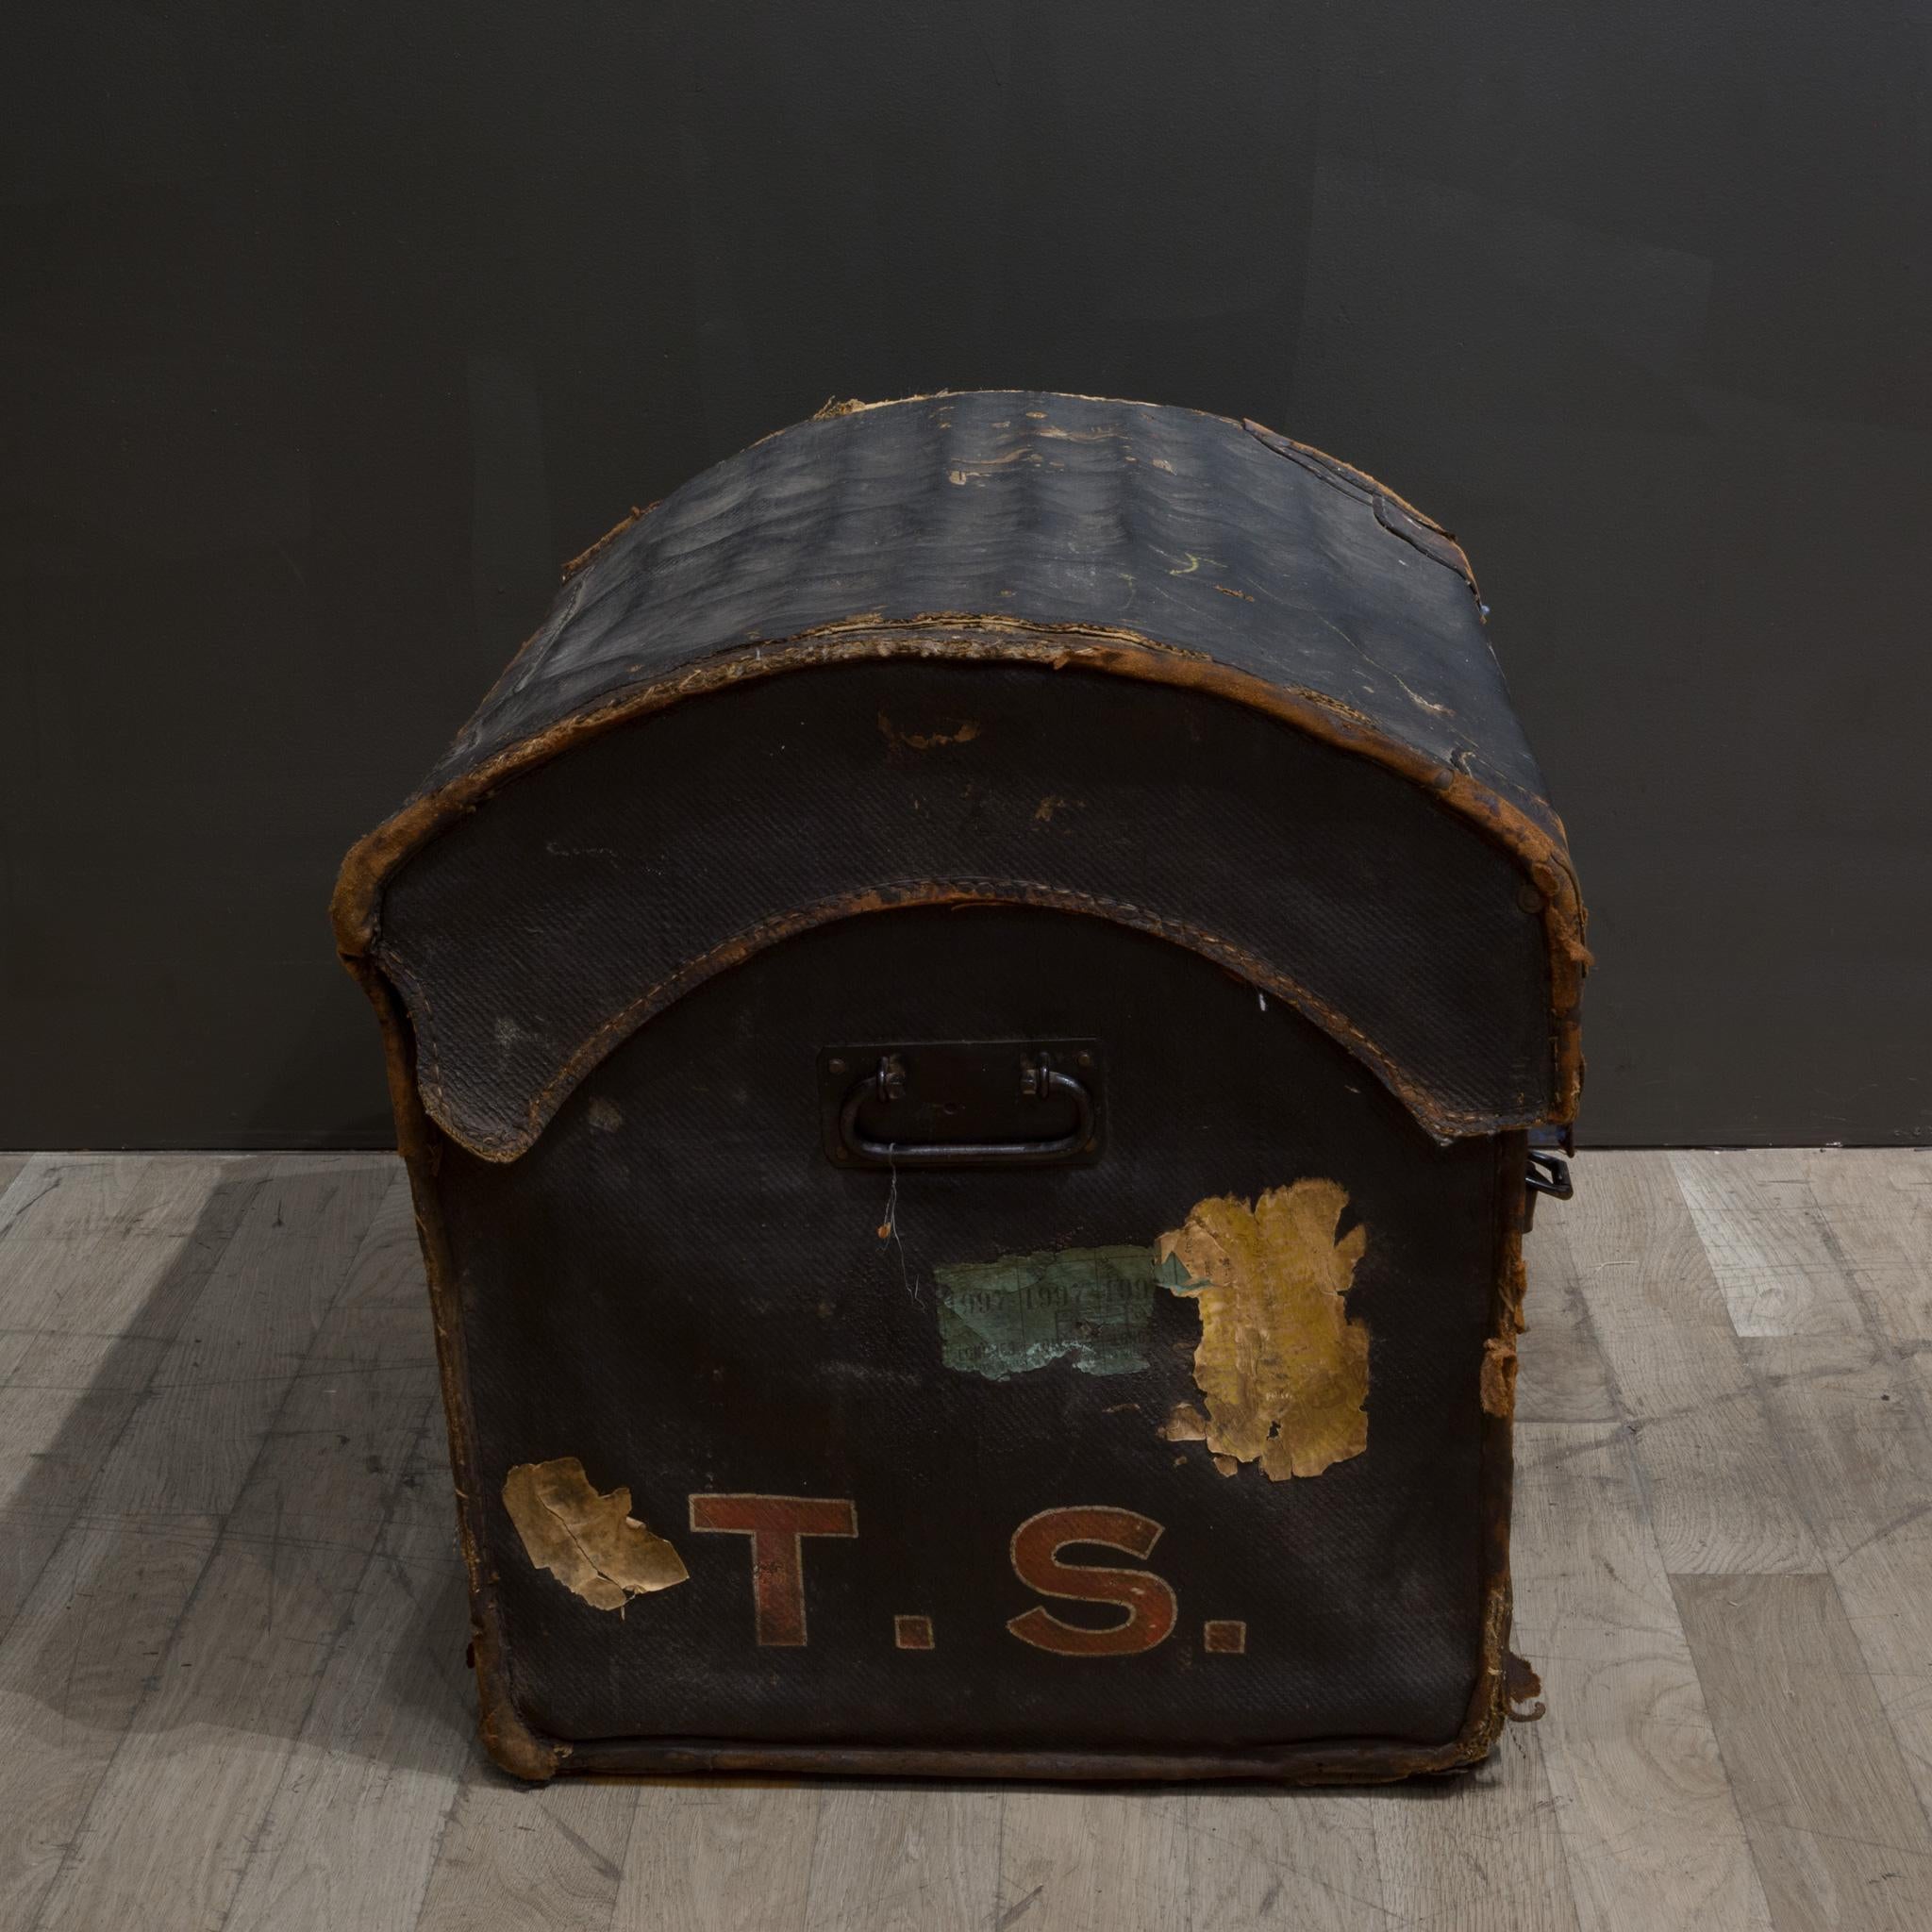 19th Century Mid 19th c. English Canvas Dome Travel Trunk c.1850